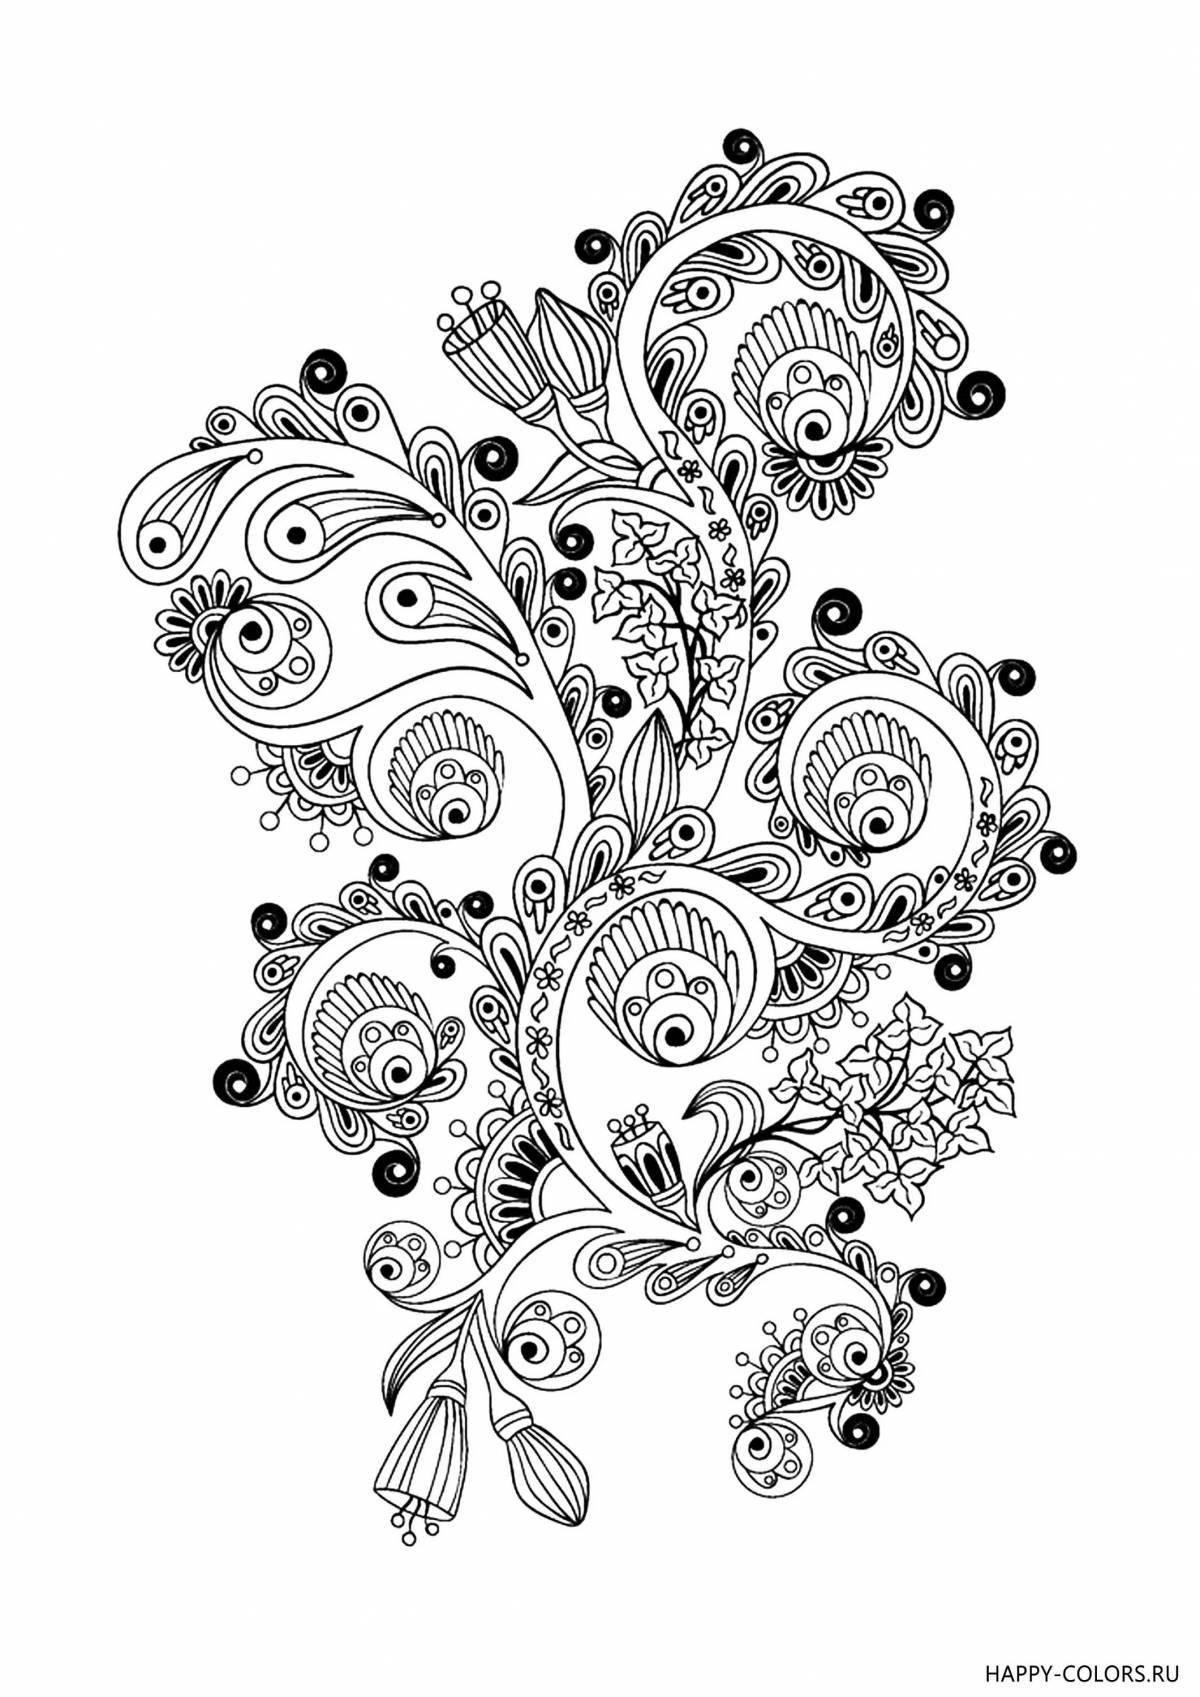 Intricate coloring graphic art